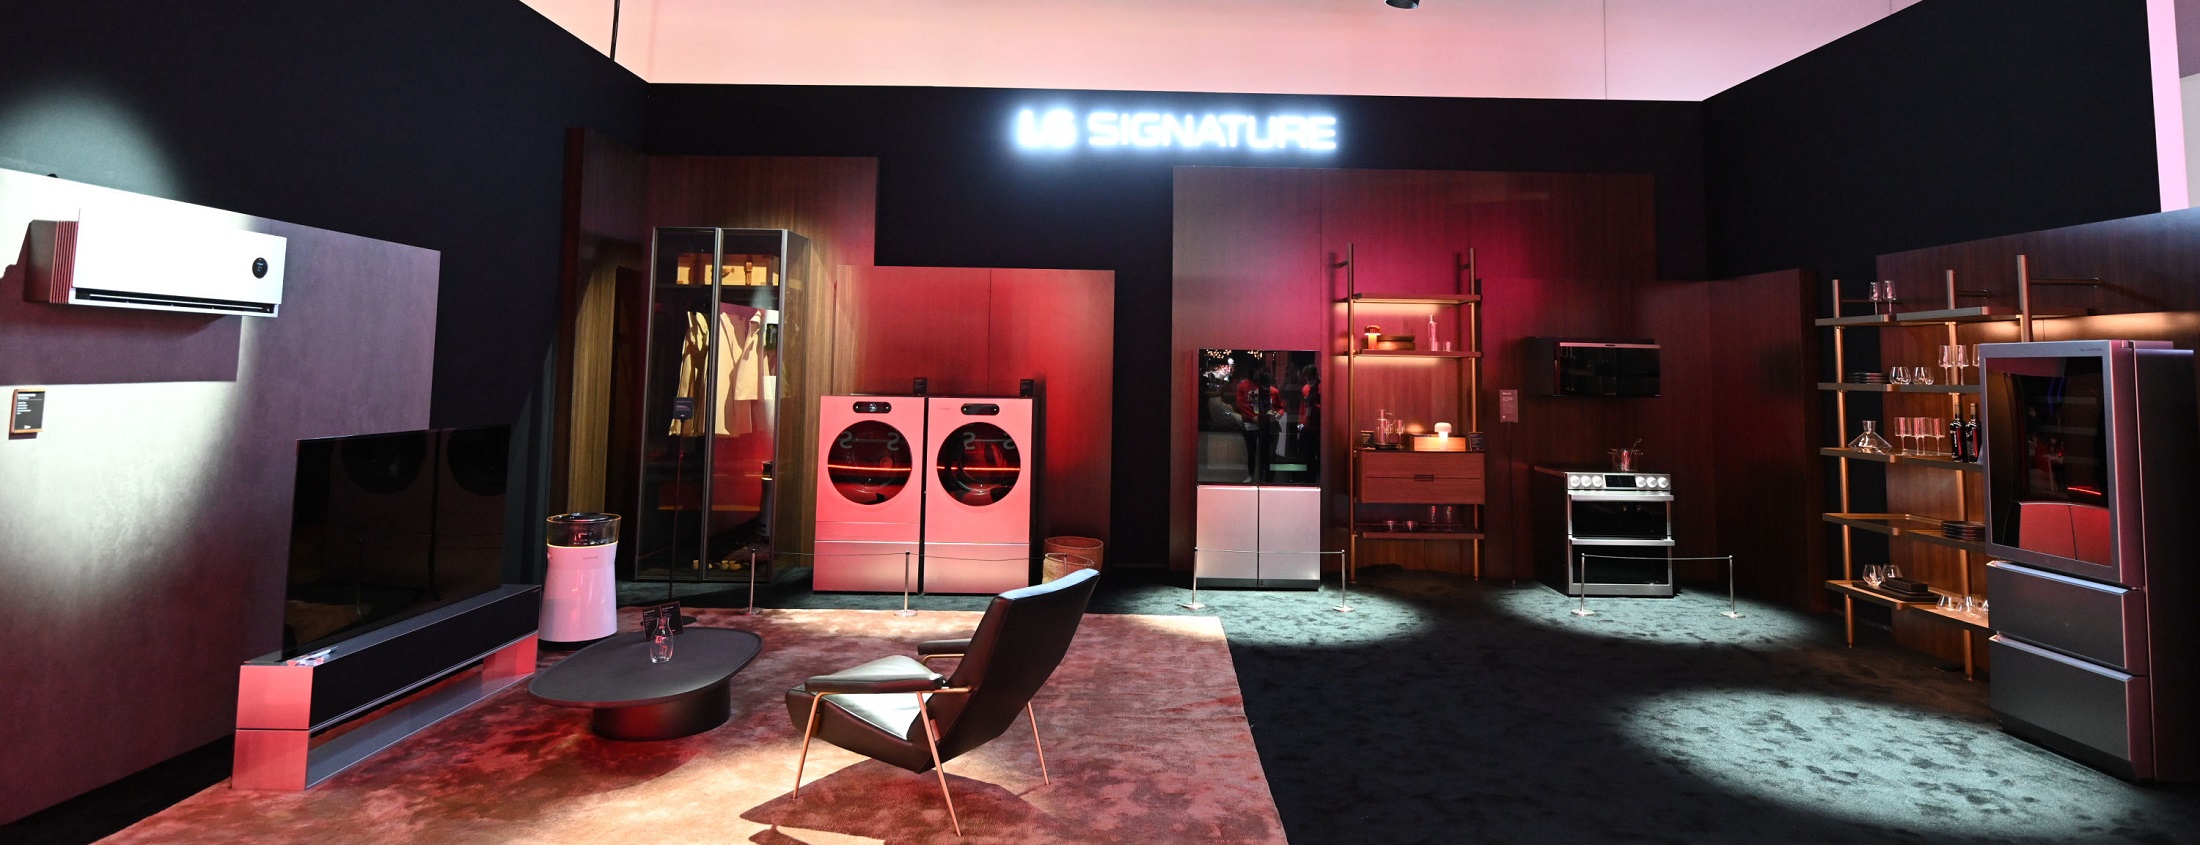 A room filled with the second generation of LG SIGNATURE products including OLED R, Dual InstaView™ refrigerator, a washer and dryer pair, air conditioner, air purifier and the Wine Cellar